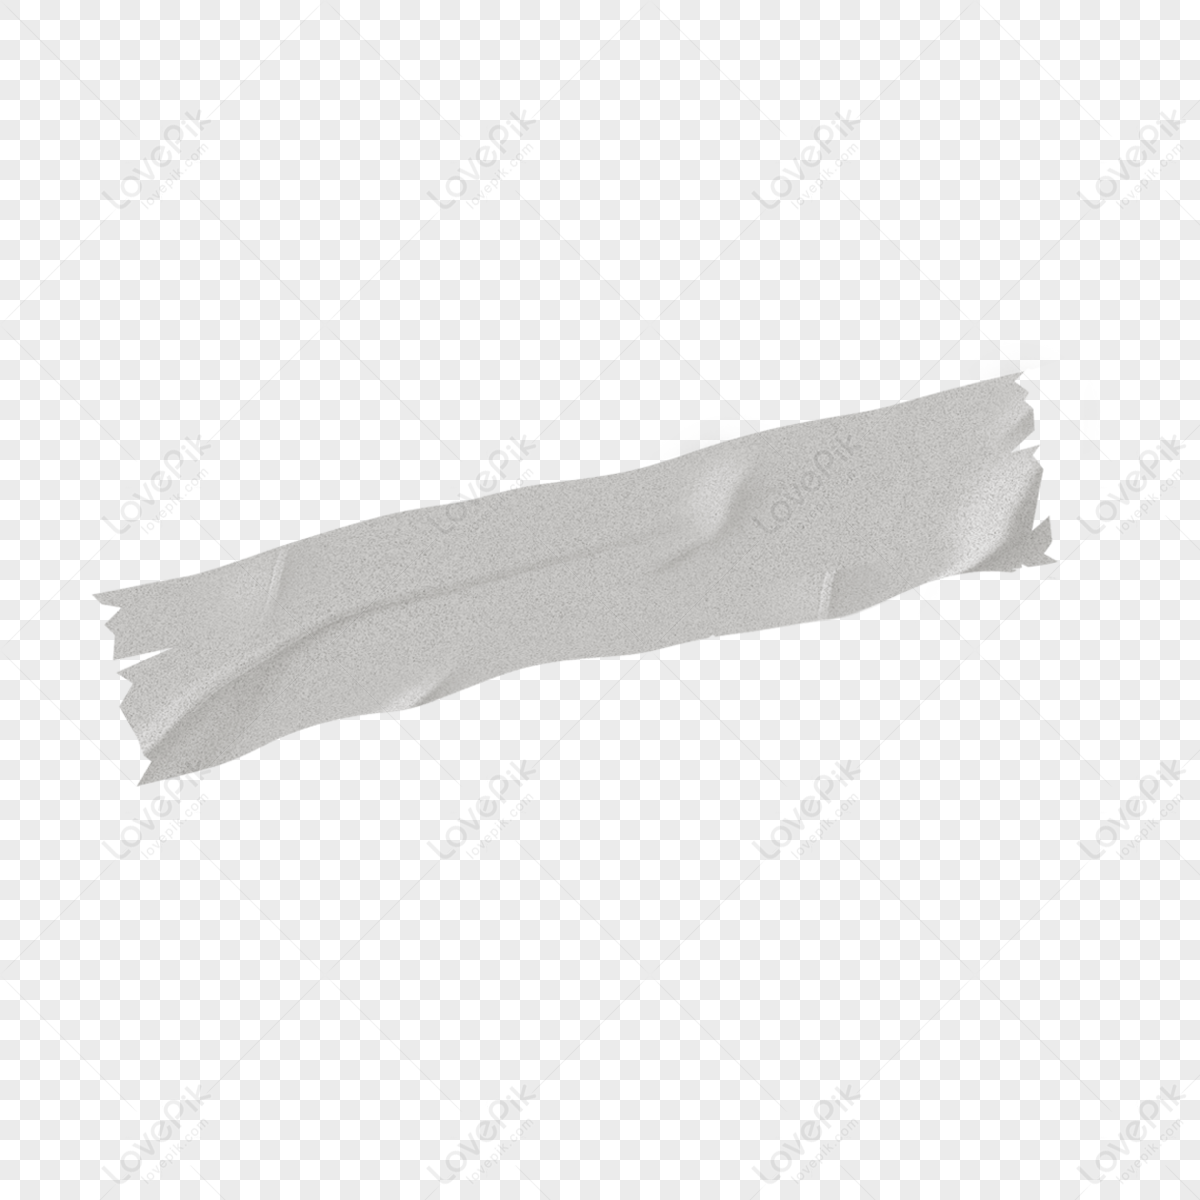 Paper Tape Clipart Transparent Background, Cute Tape Broken Paper, Cute,  Tape, Damaged PNG Image For Free Download